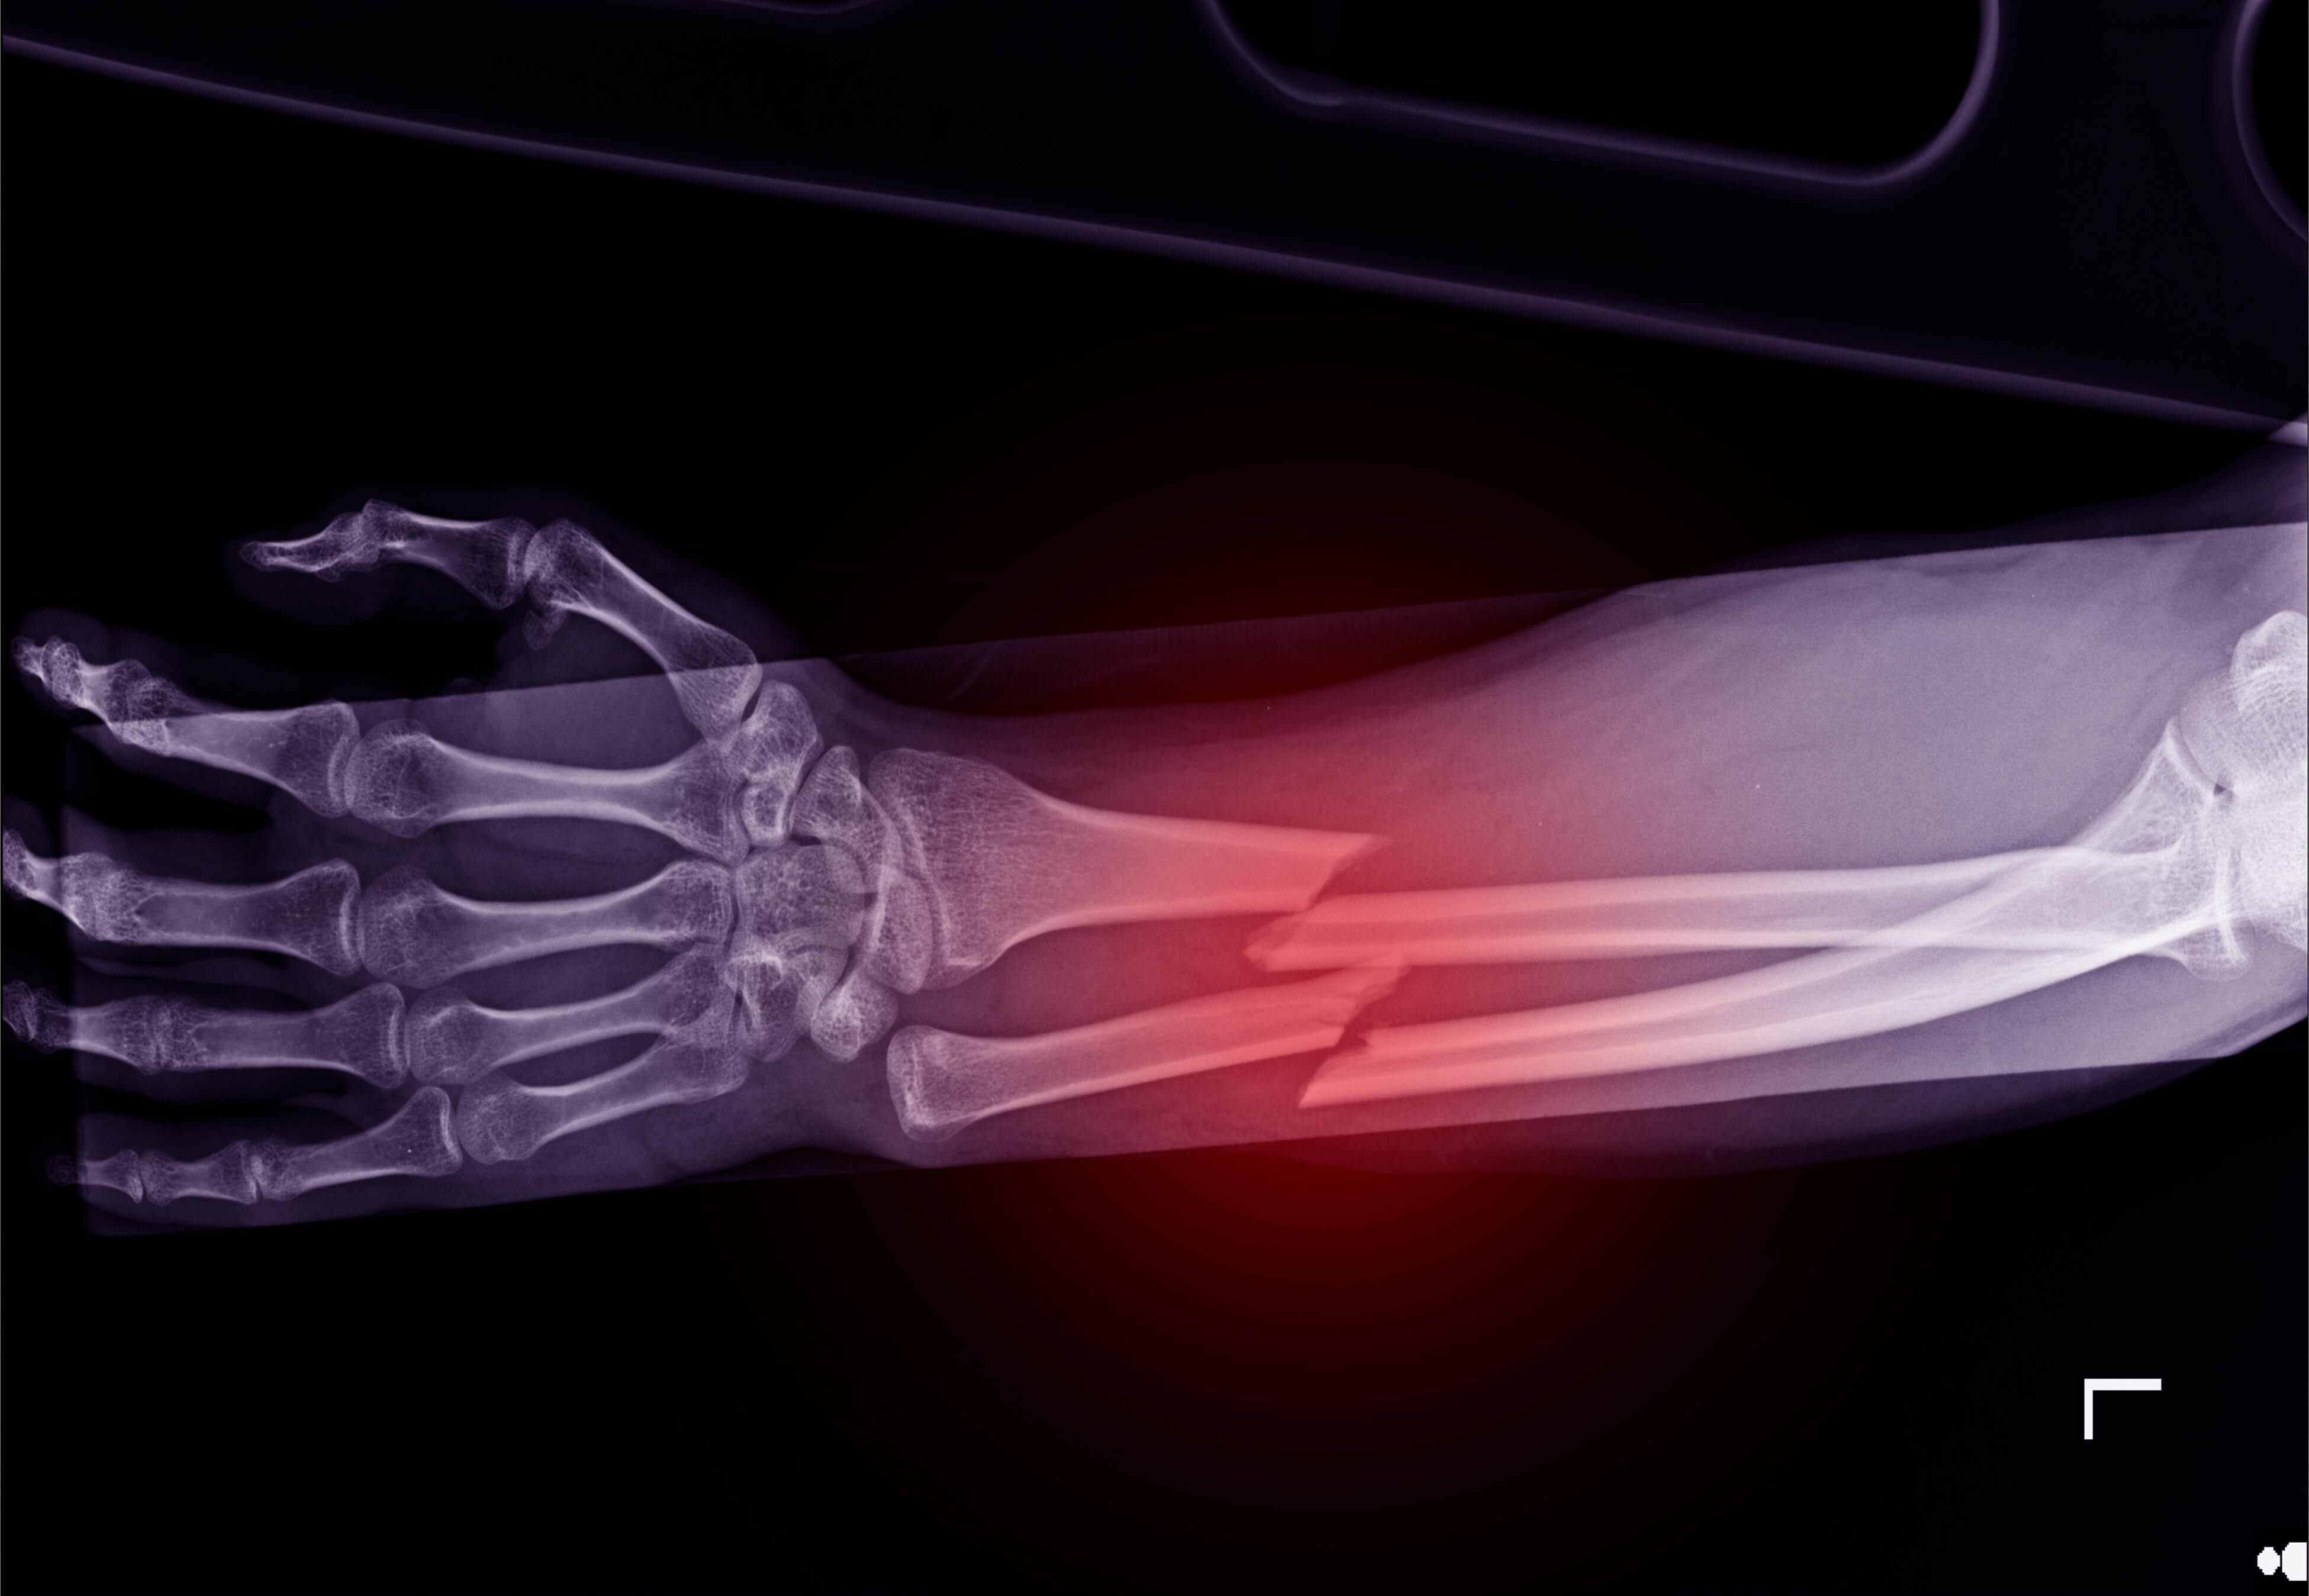 image of arm injuries on our chiropractic continuing education online page